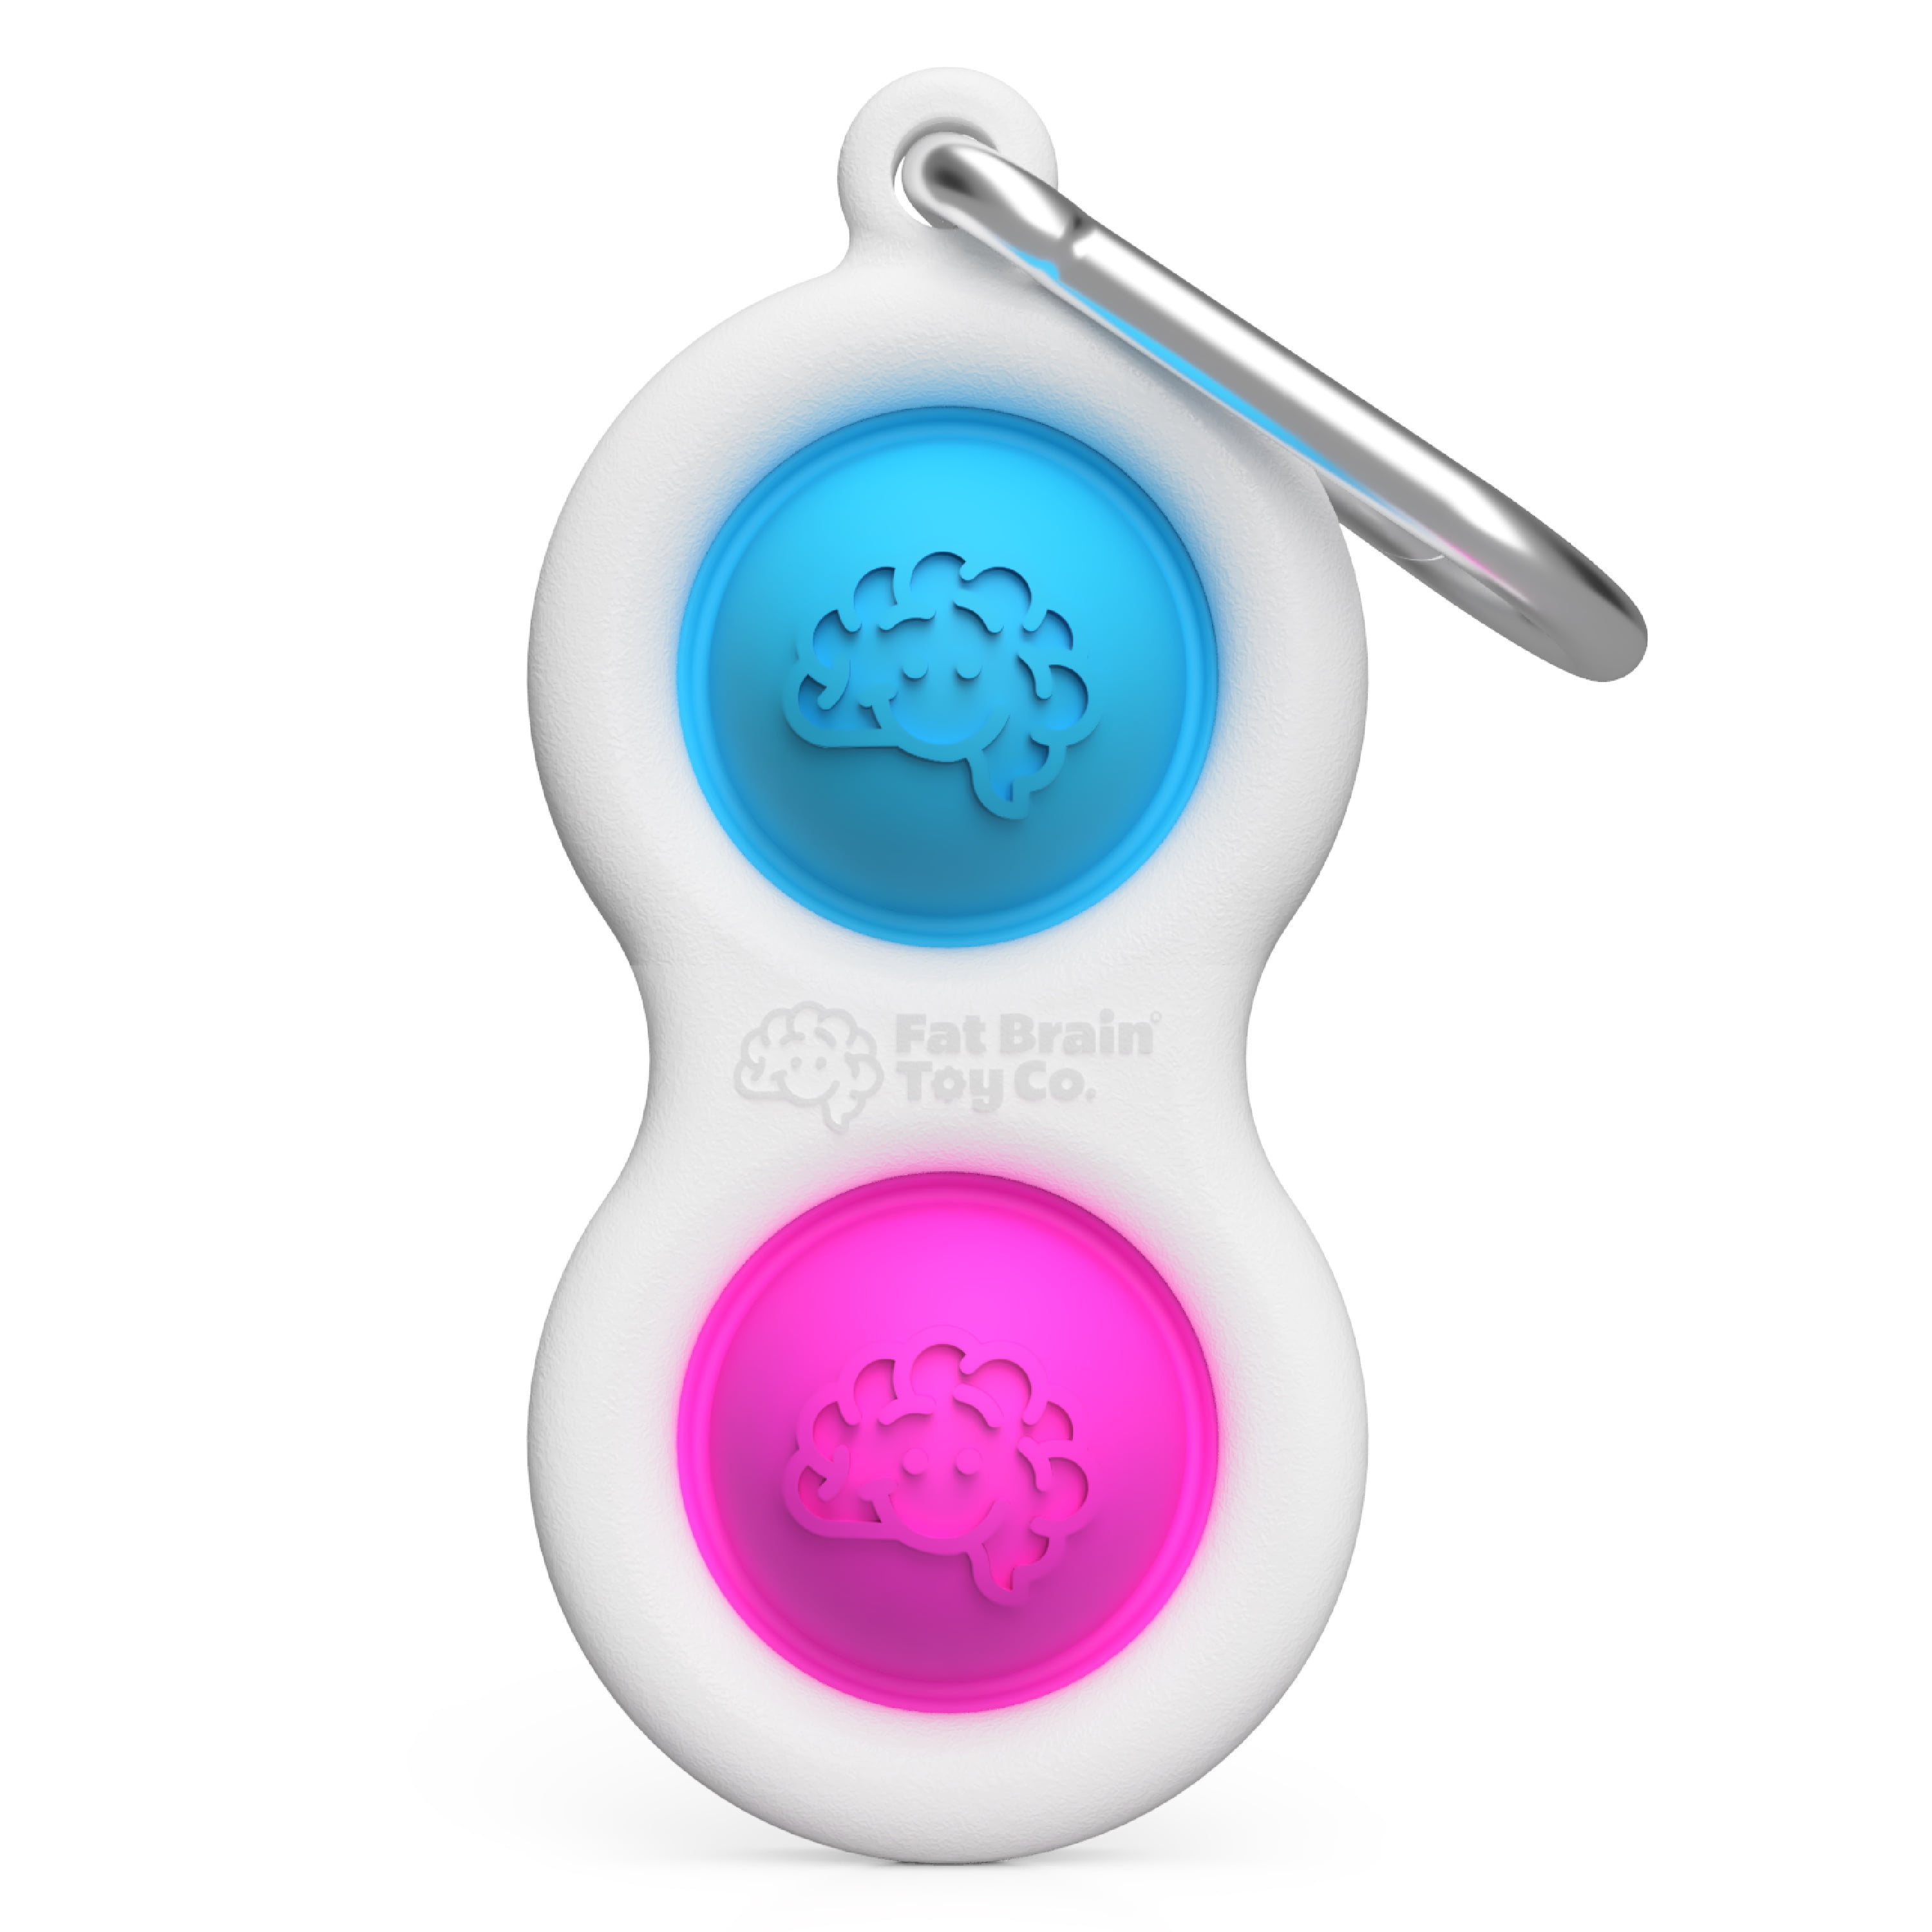 Simpl Dimpl FIDGIT pad Fat Brain Buttons STOCKING STUFFER Antistress reliver toy 